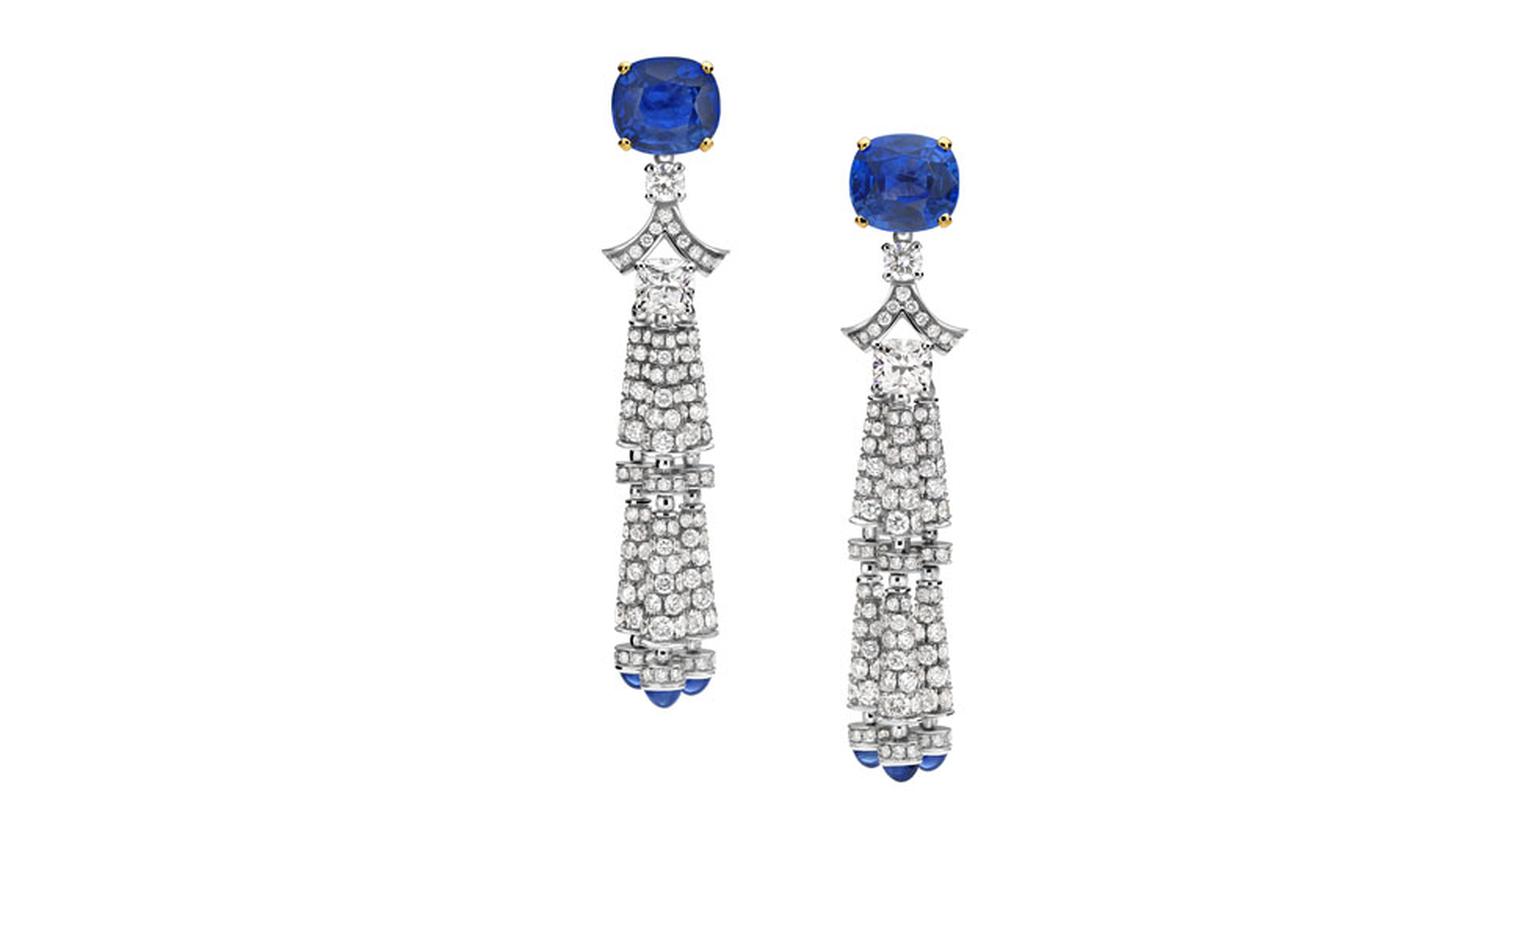 Bulgari. High Jewellery earrings in white gold with 2 cushion-shaped sapphires, cushion-shaped diamonds, round brilliant cut diamonds and cabochon cut sapphires. POA.